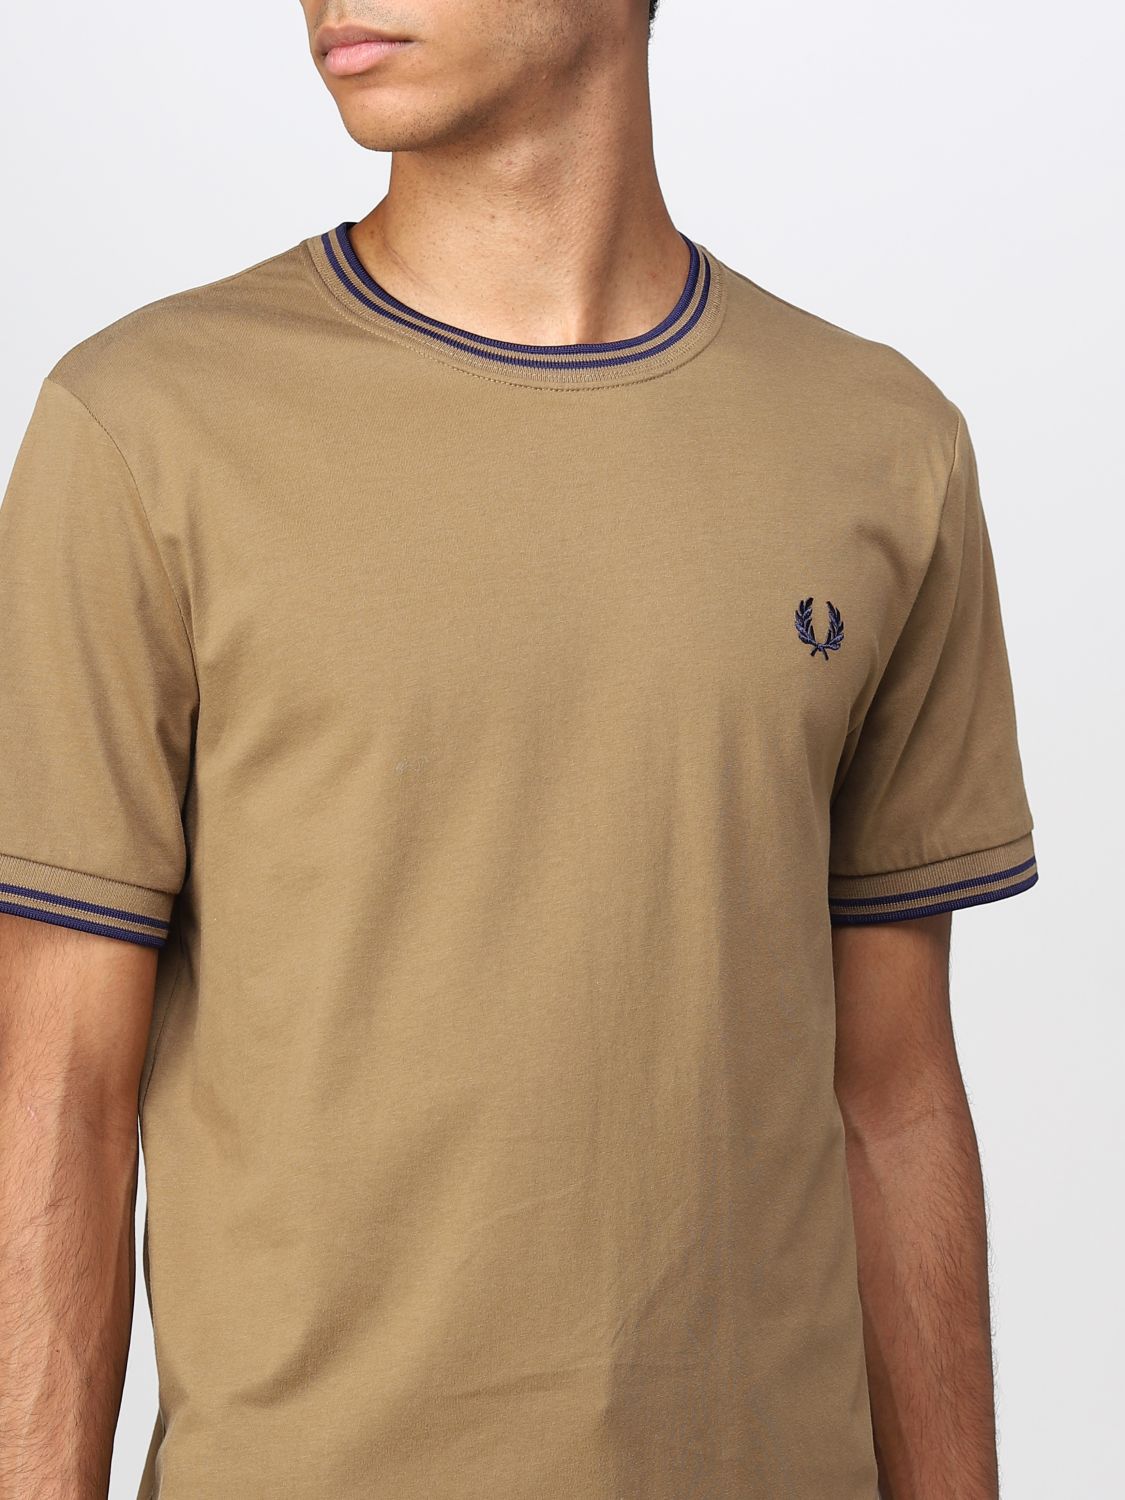 T-shirt Fred Perry: Fred Perry t-shirt for man brown 3